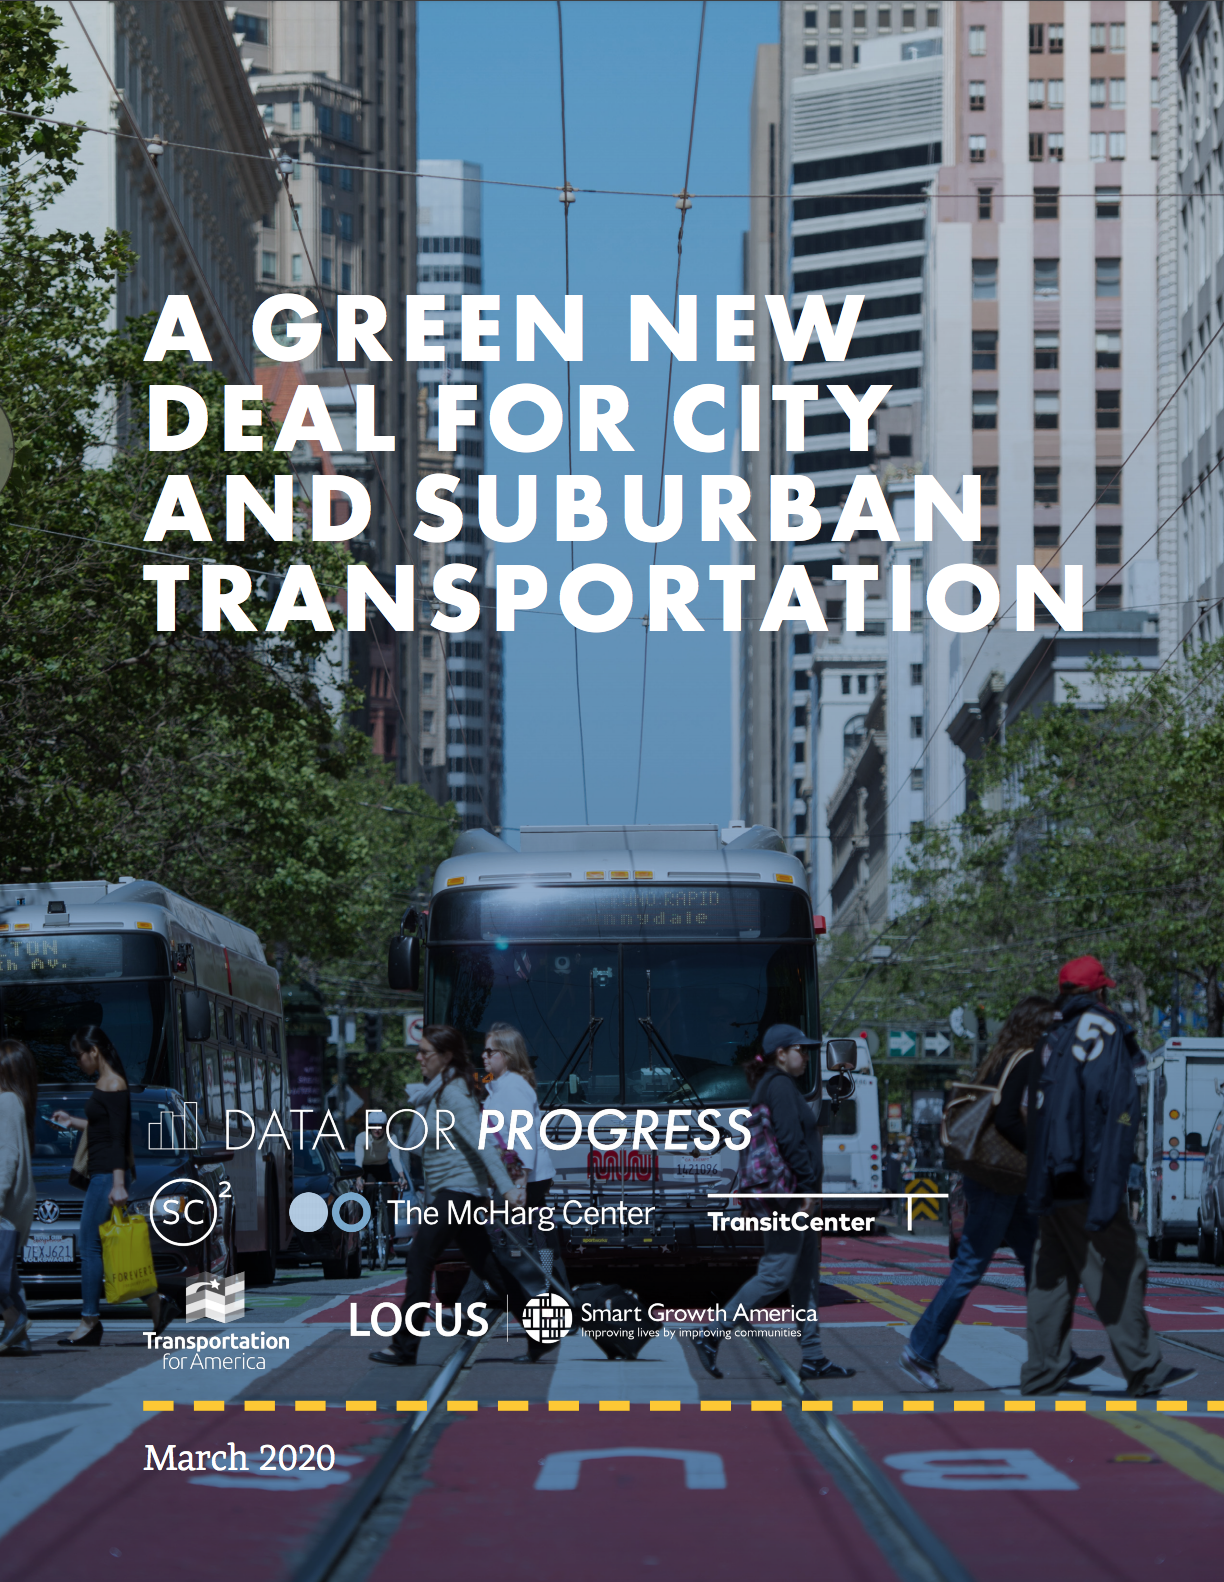 A Green New Deal for City and Suburban Transportation